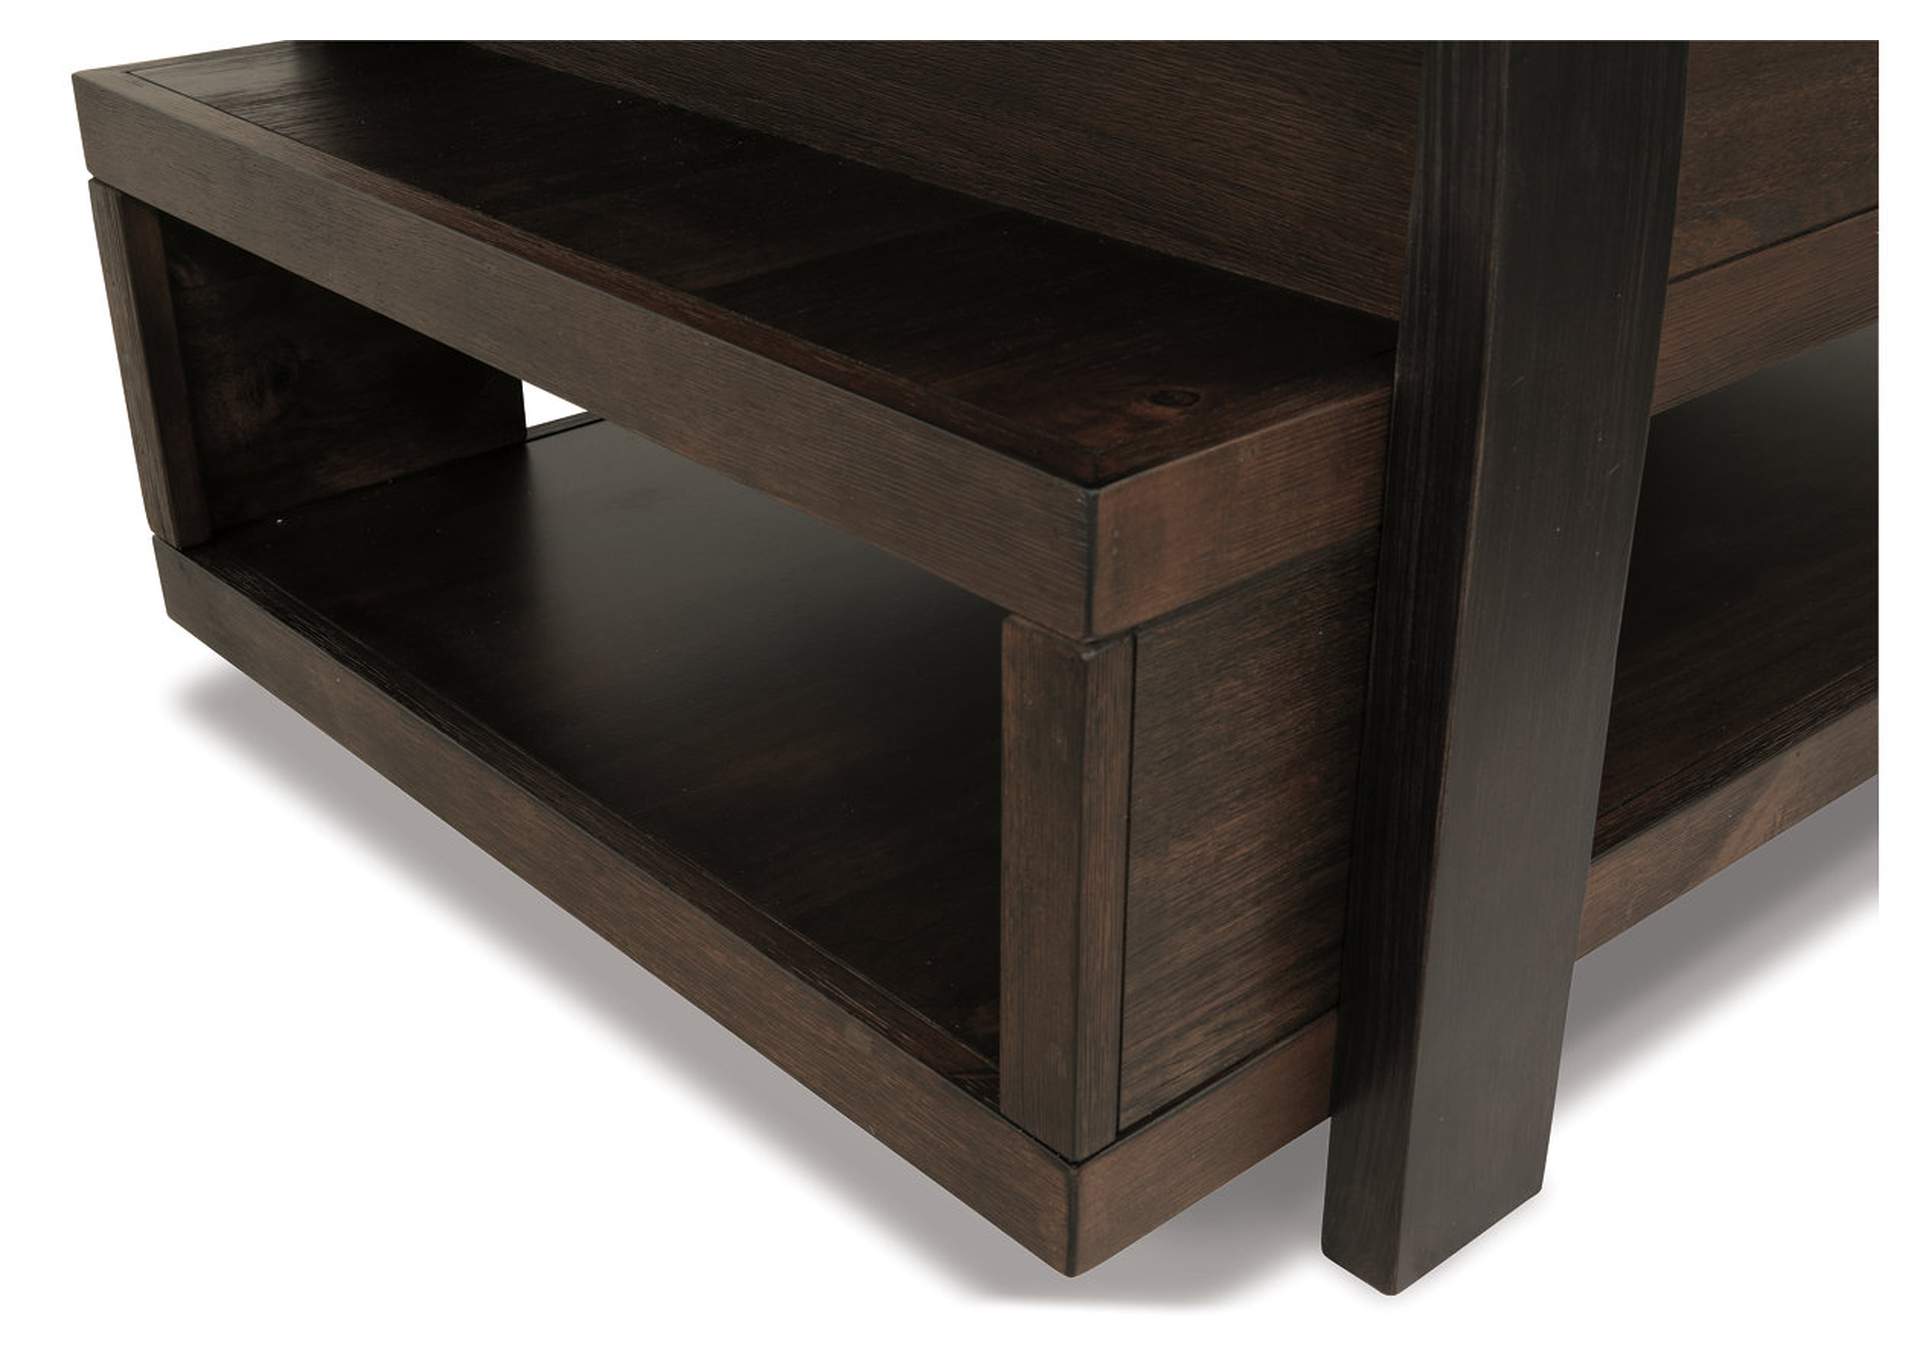 Vailbry Coffee Table with Lift Top,Signature Design By Ashley